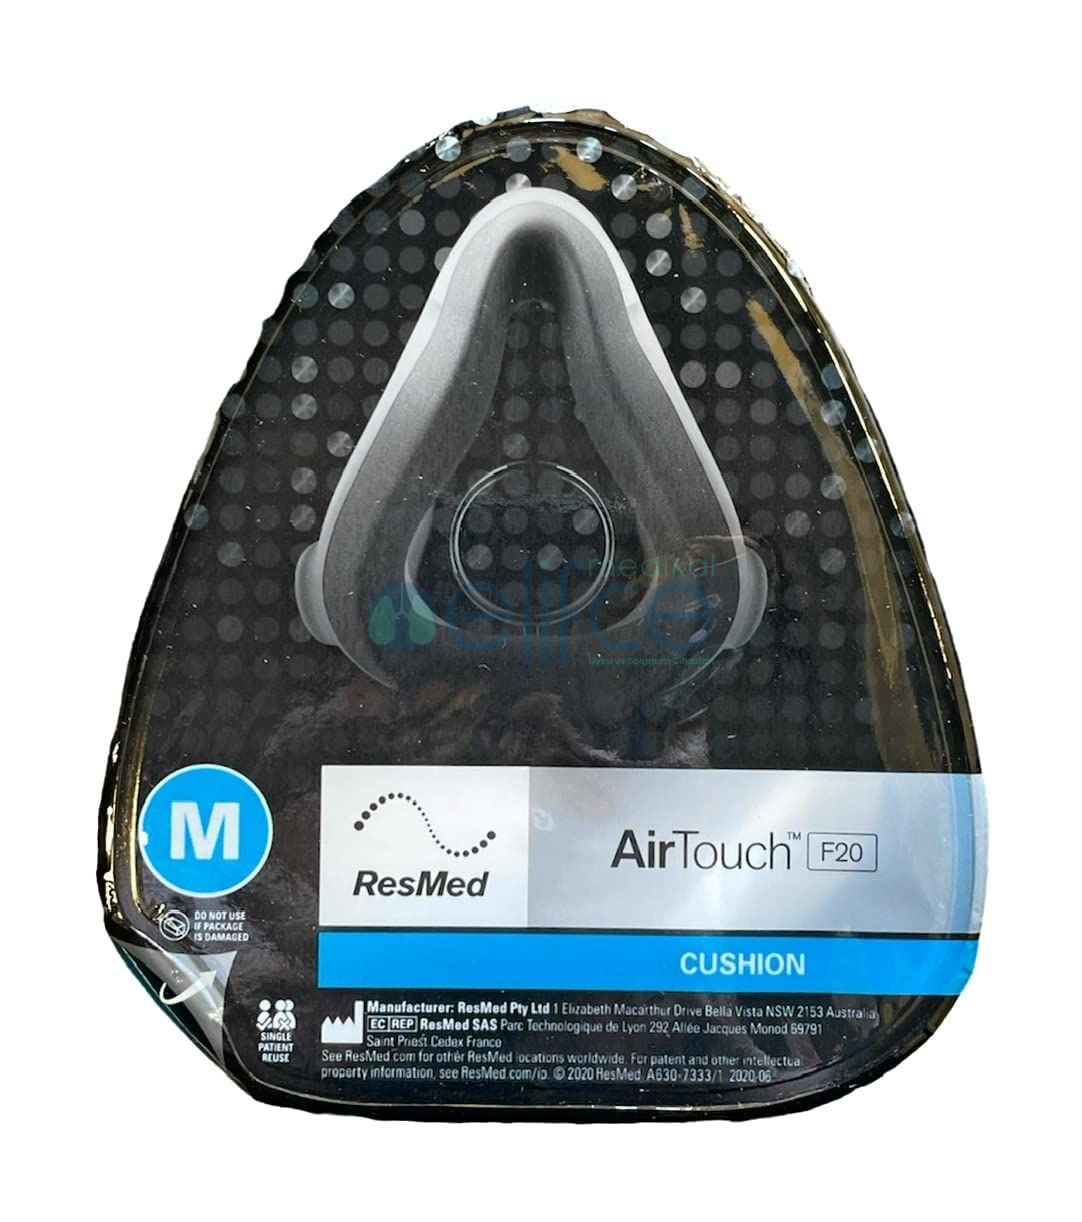 Resmed AirTouch F20